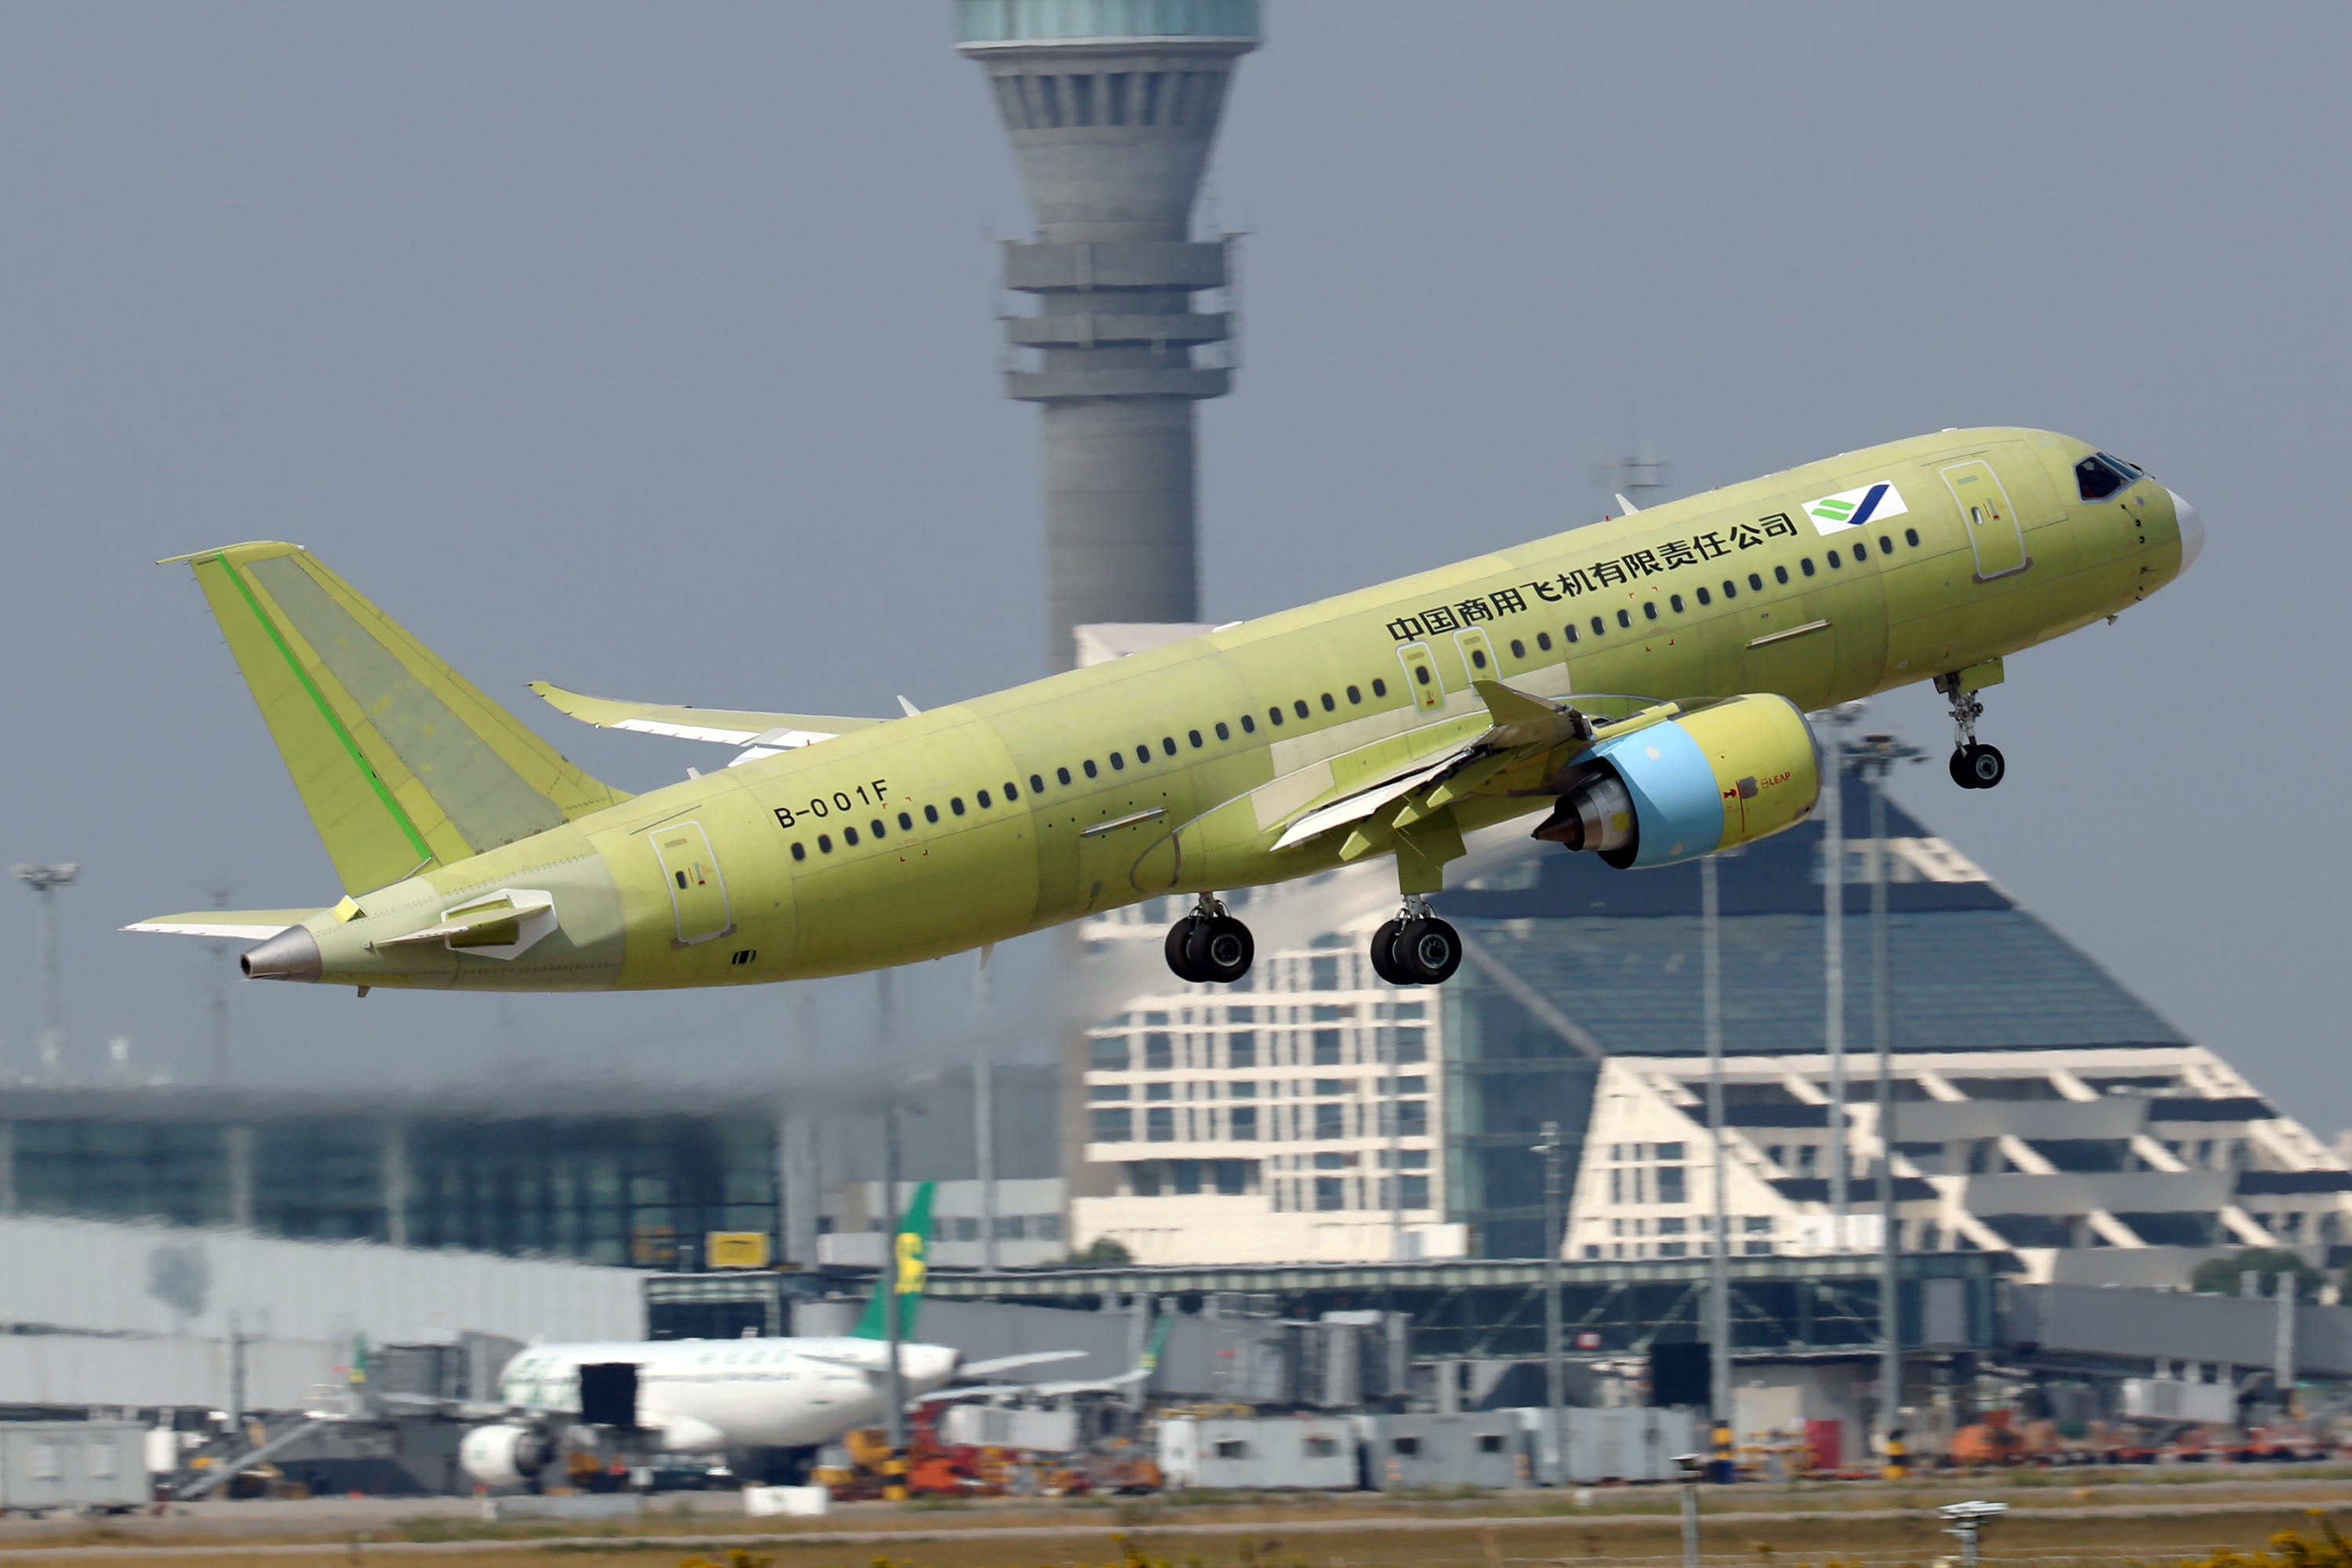 The fifth prototype of China's home-built C919 passenger plane takes off for its first test flight from Shanghai Pudong International Airport in Shanghai